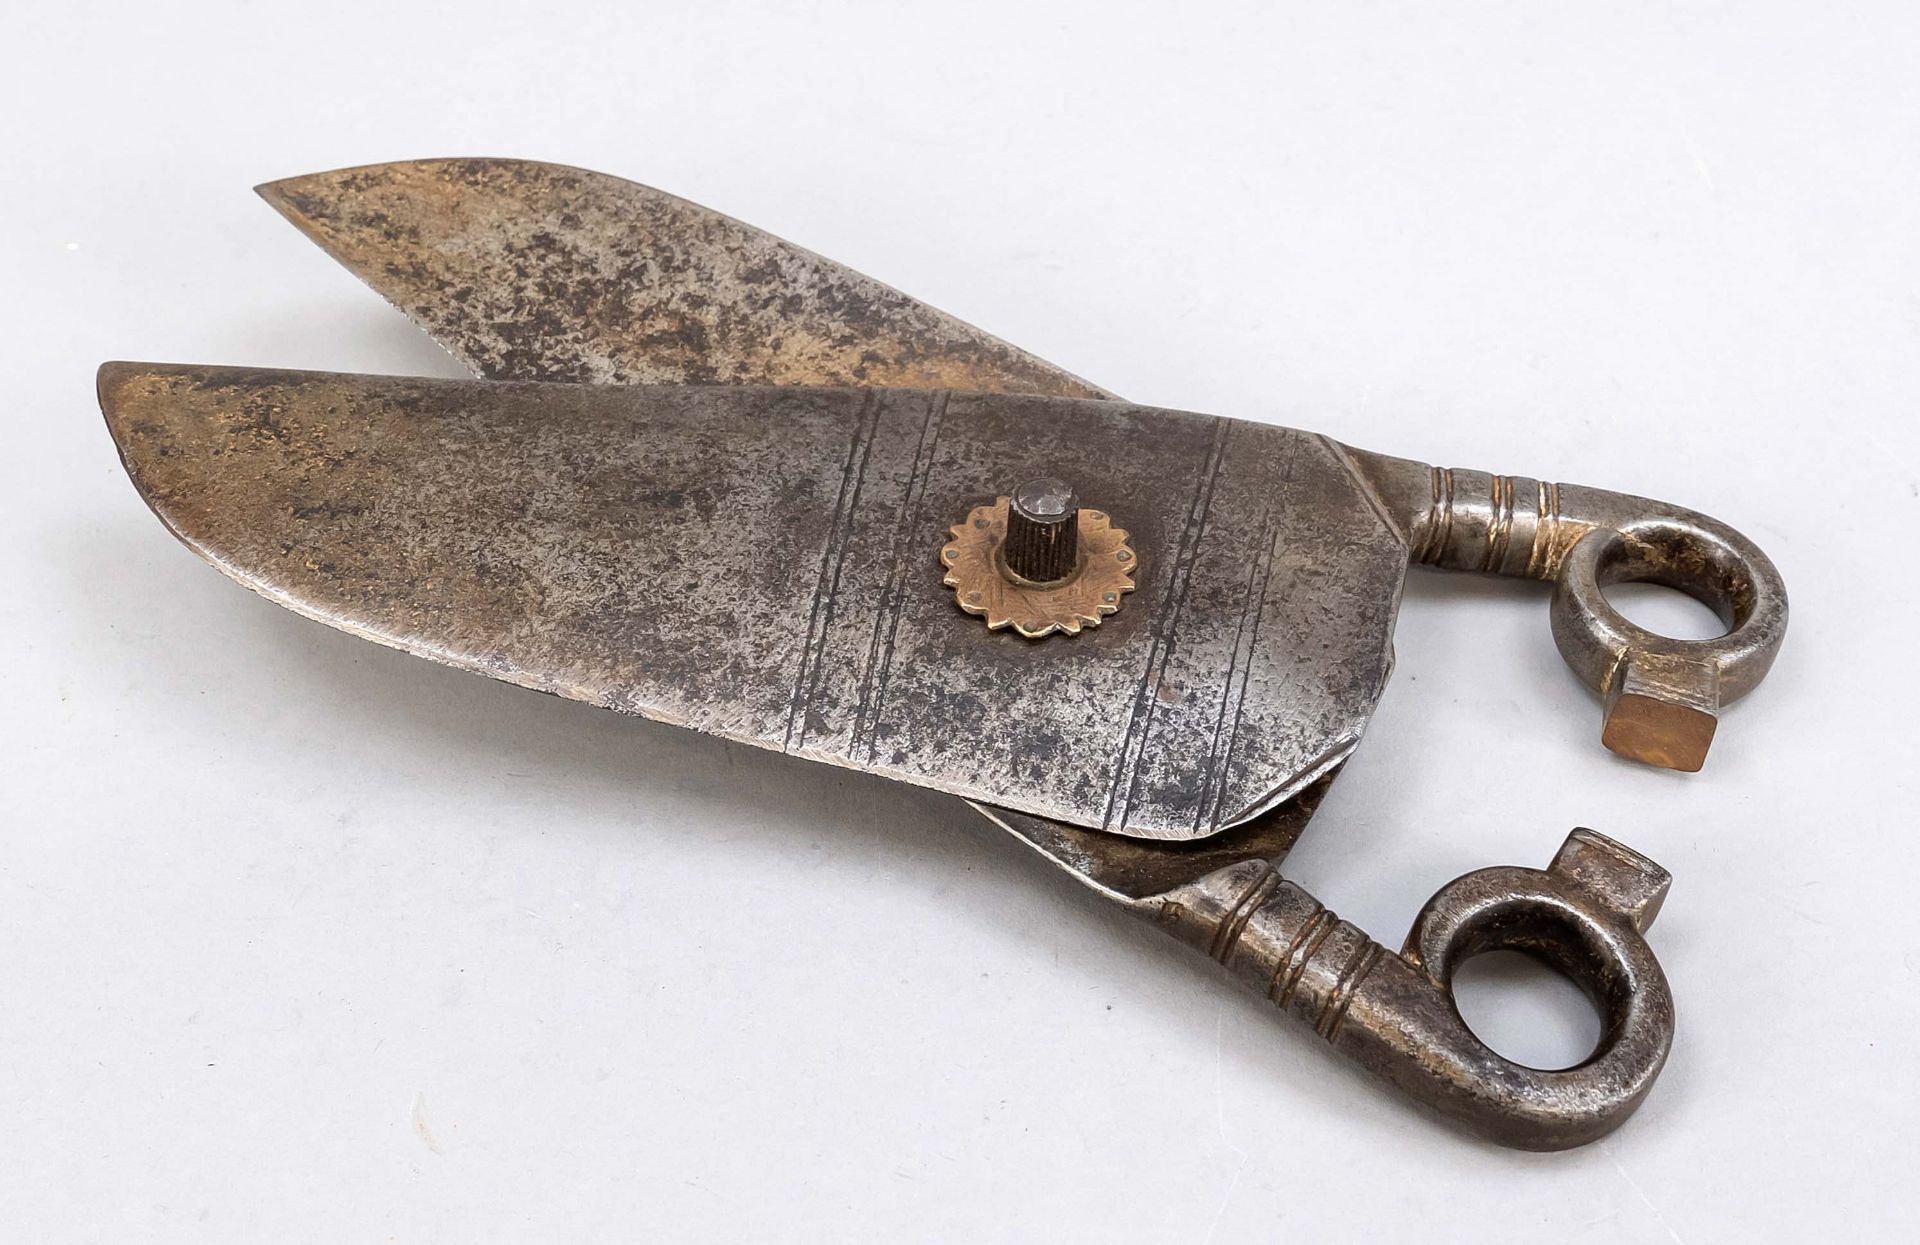 Antique scissors, 19th century (or earlier?), iron. Very wide blades, l. 26 cm